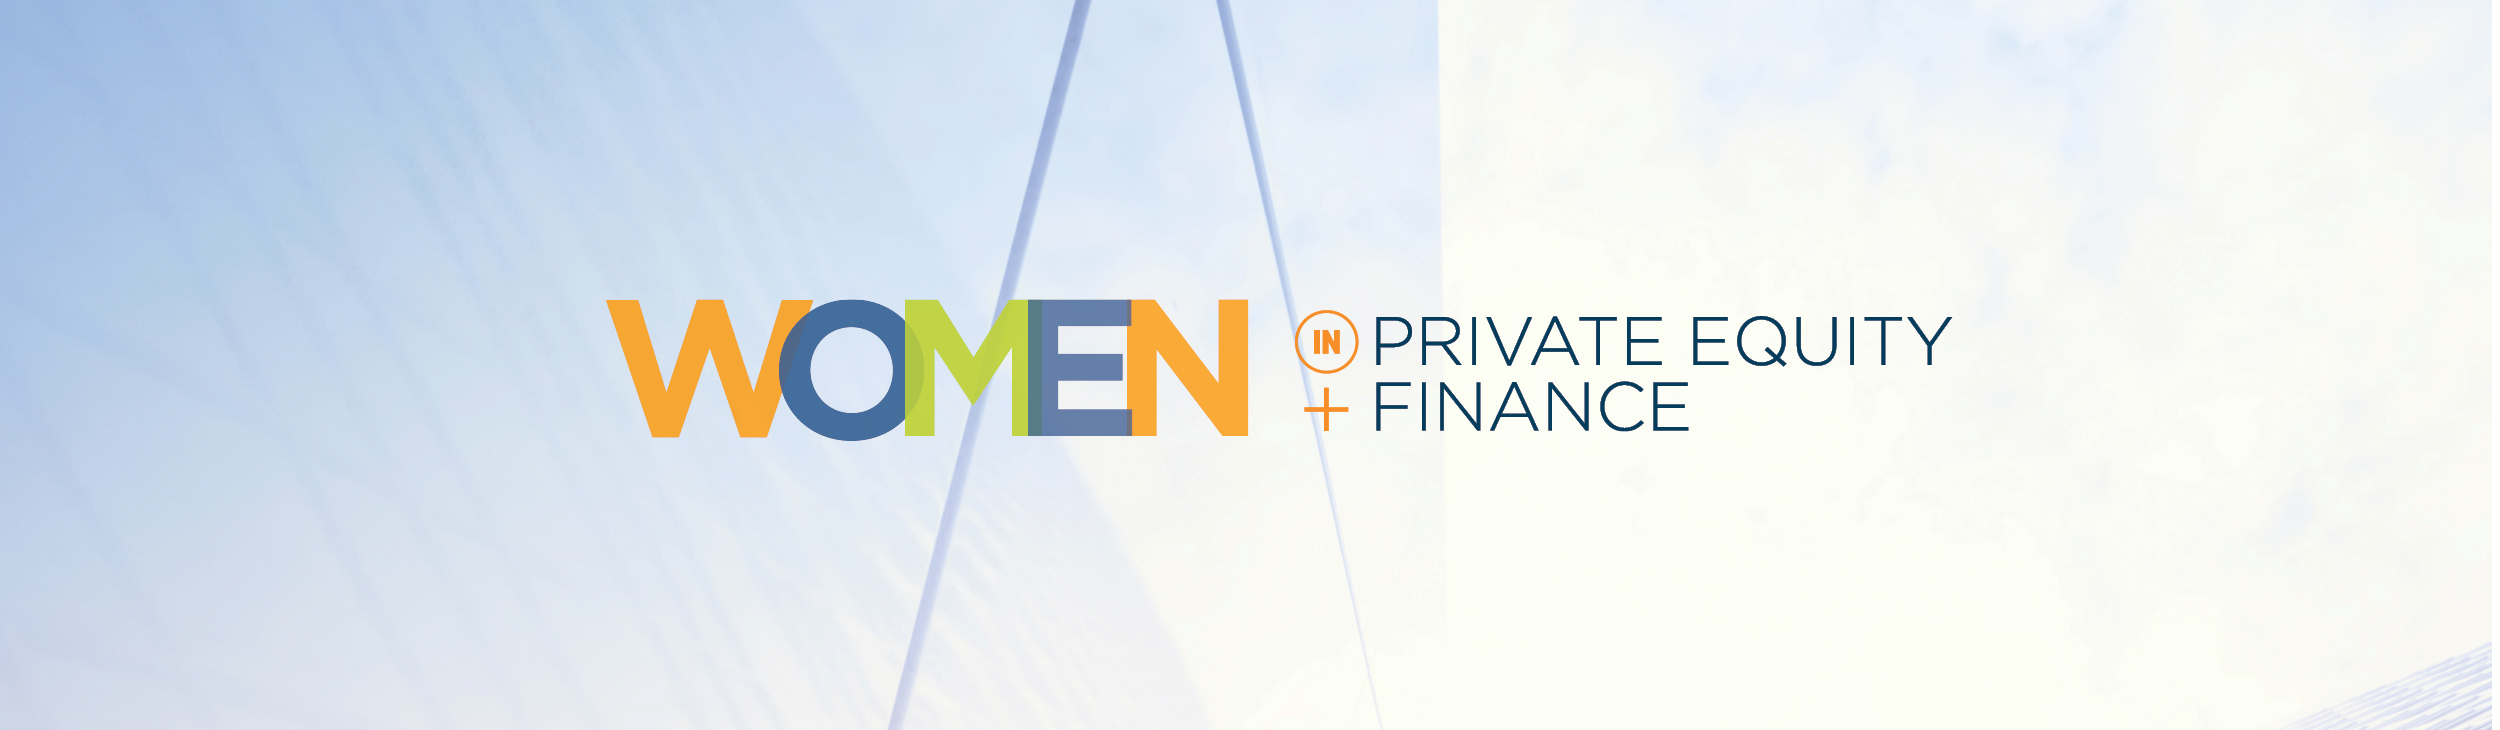 Women in Private Equity + Finance banner